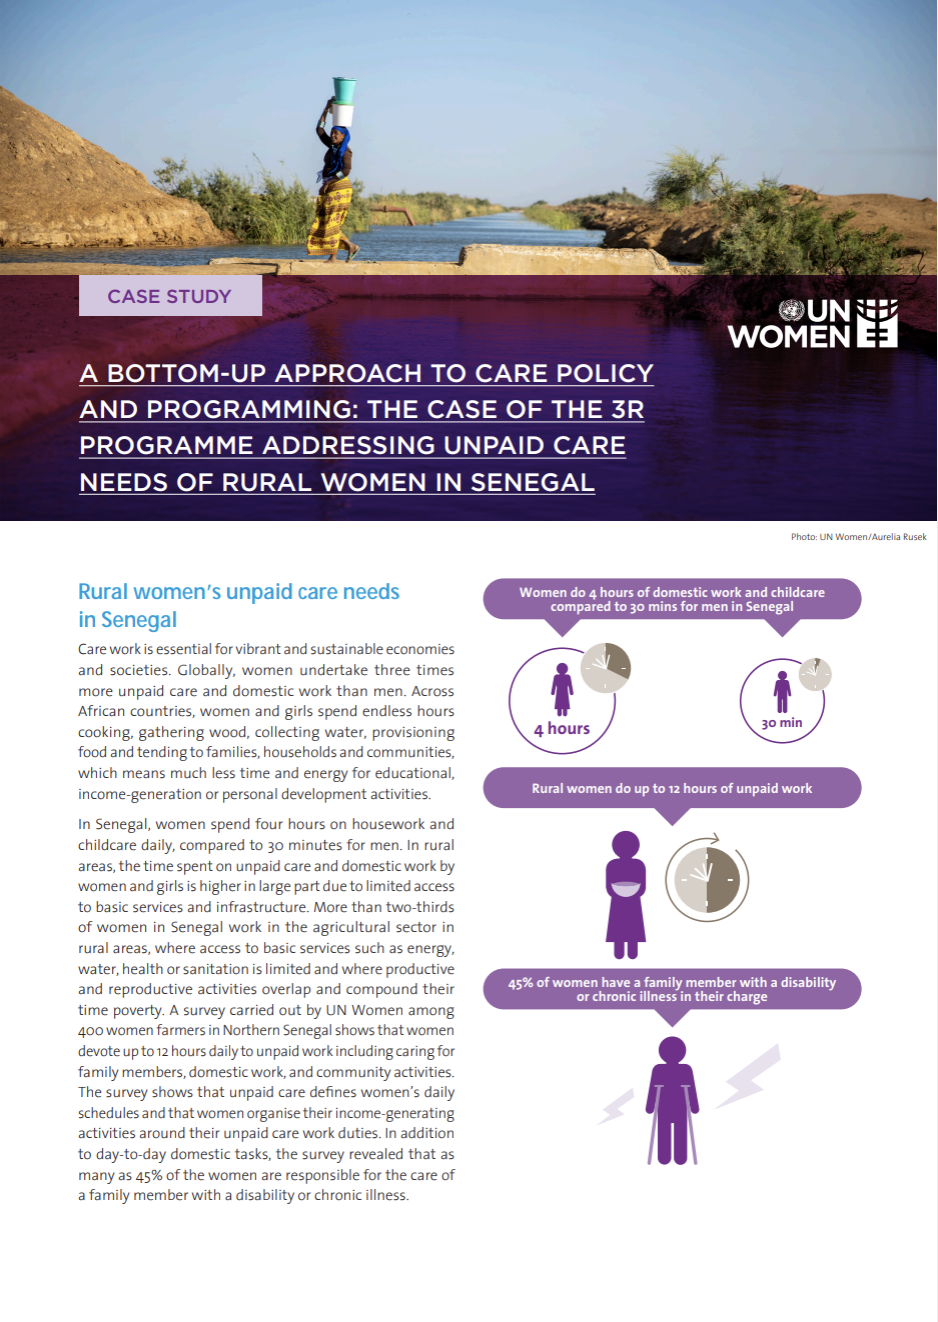 A BOTTOM-UP APPROACH TO CARE POLICY AND PROGRAMMING: THE CASE OF THE 3R PROGRAMME ADDRESSING UNPAID CARE NEEDS OF RURAL WOMEN IN SENEGAL.